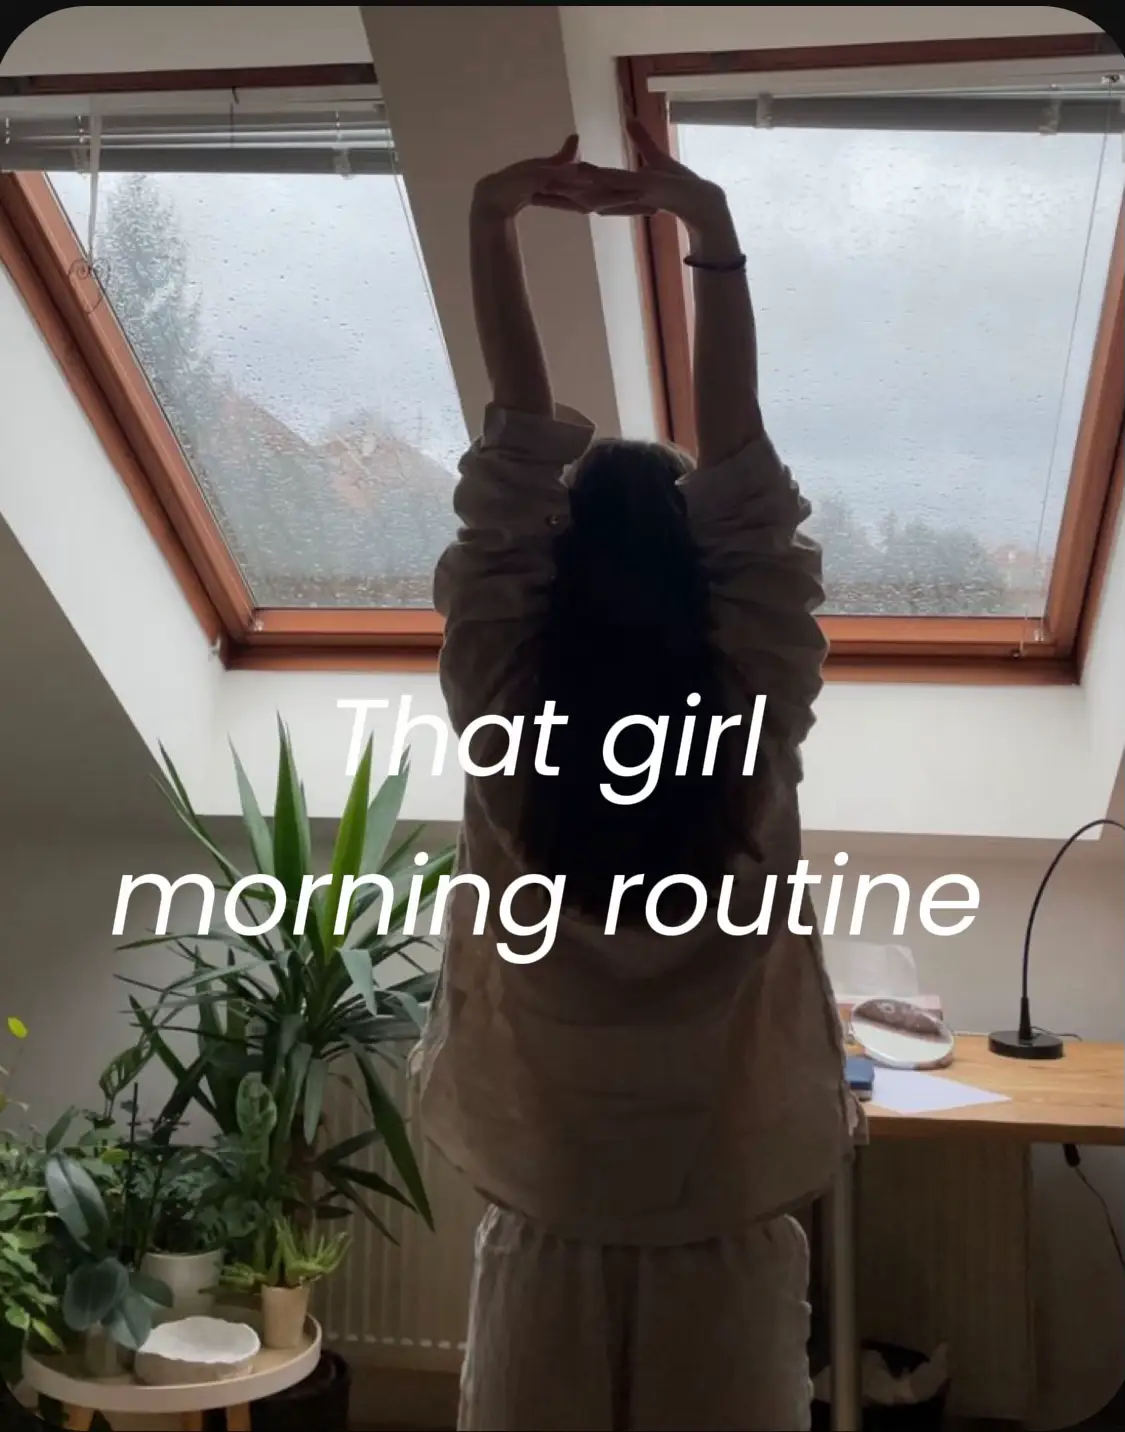 granola girl aesthetic: the trend & its slow living roots — Slow Morning  Diaries